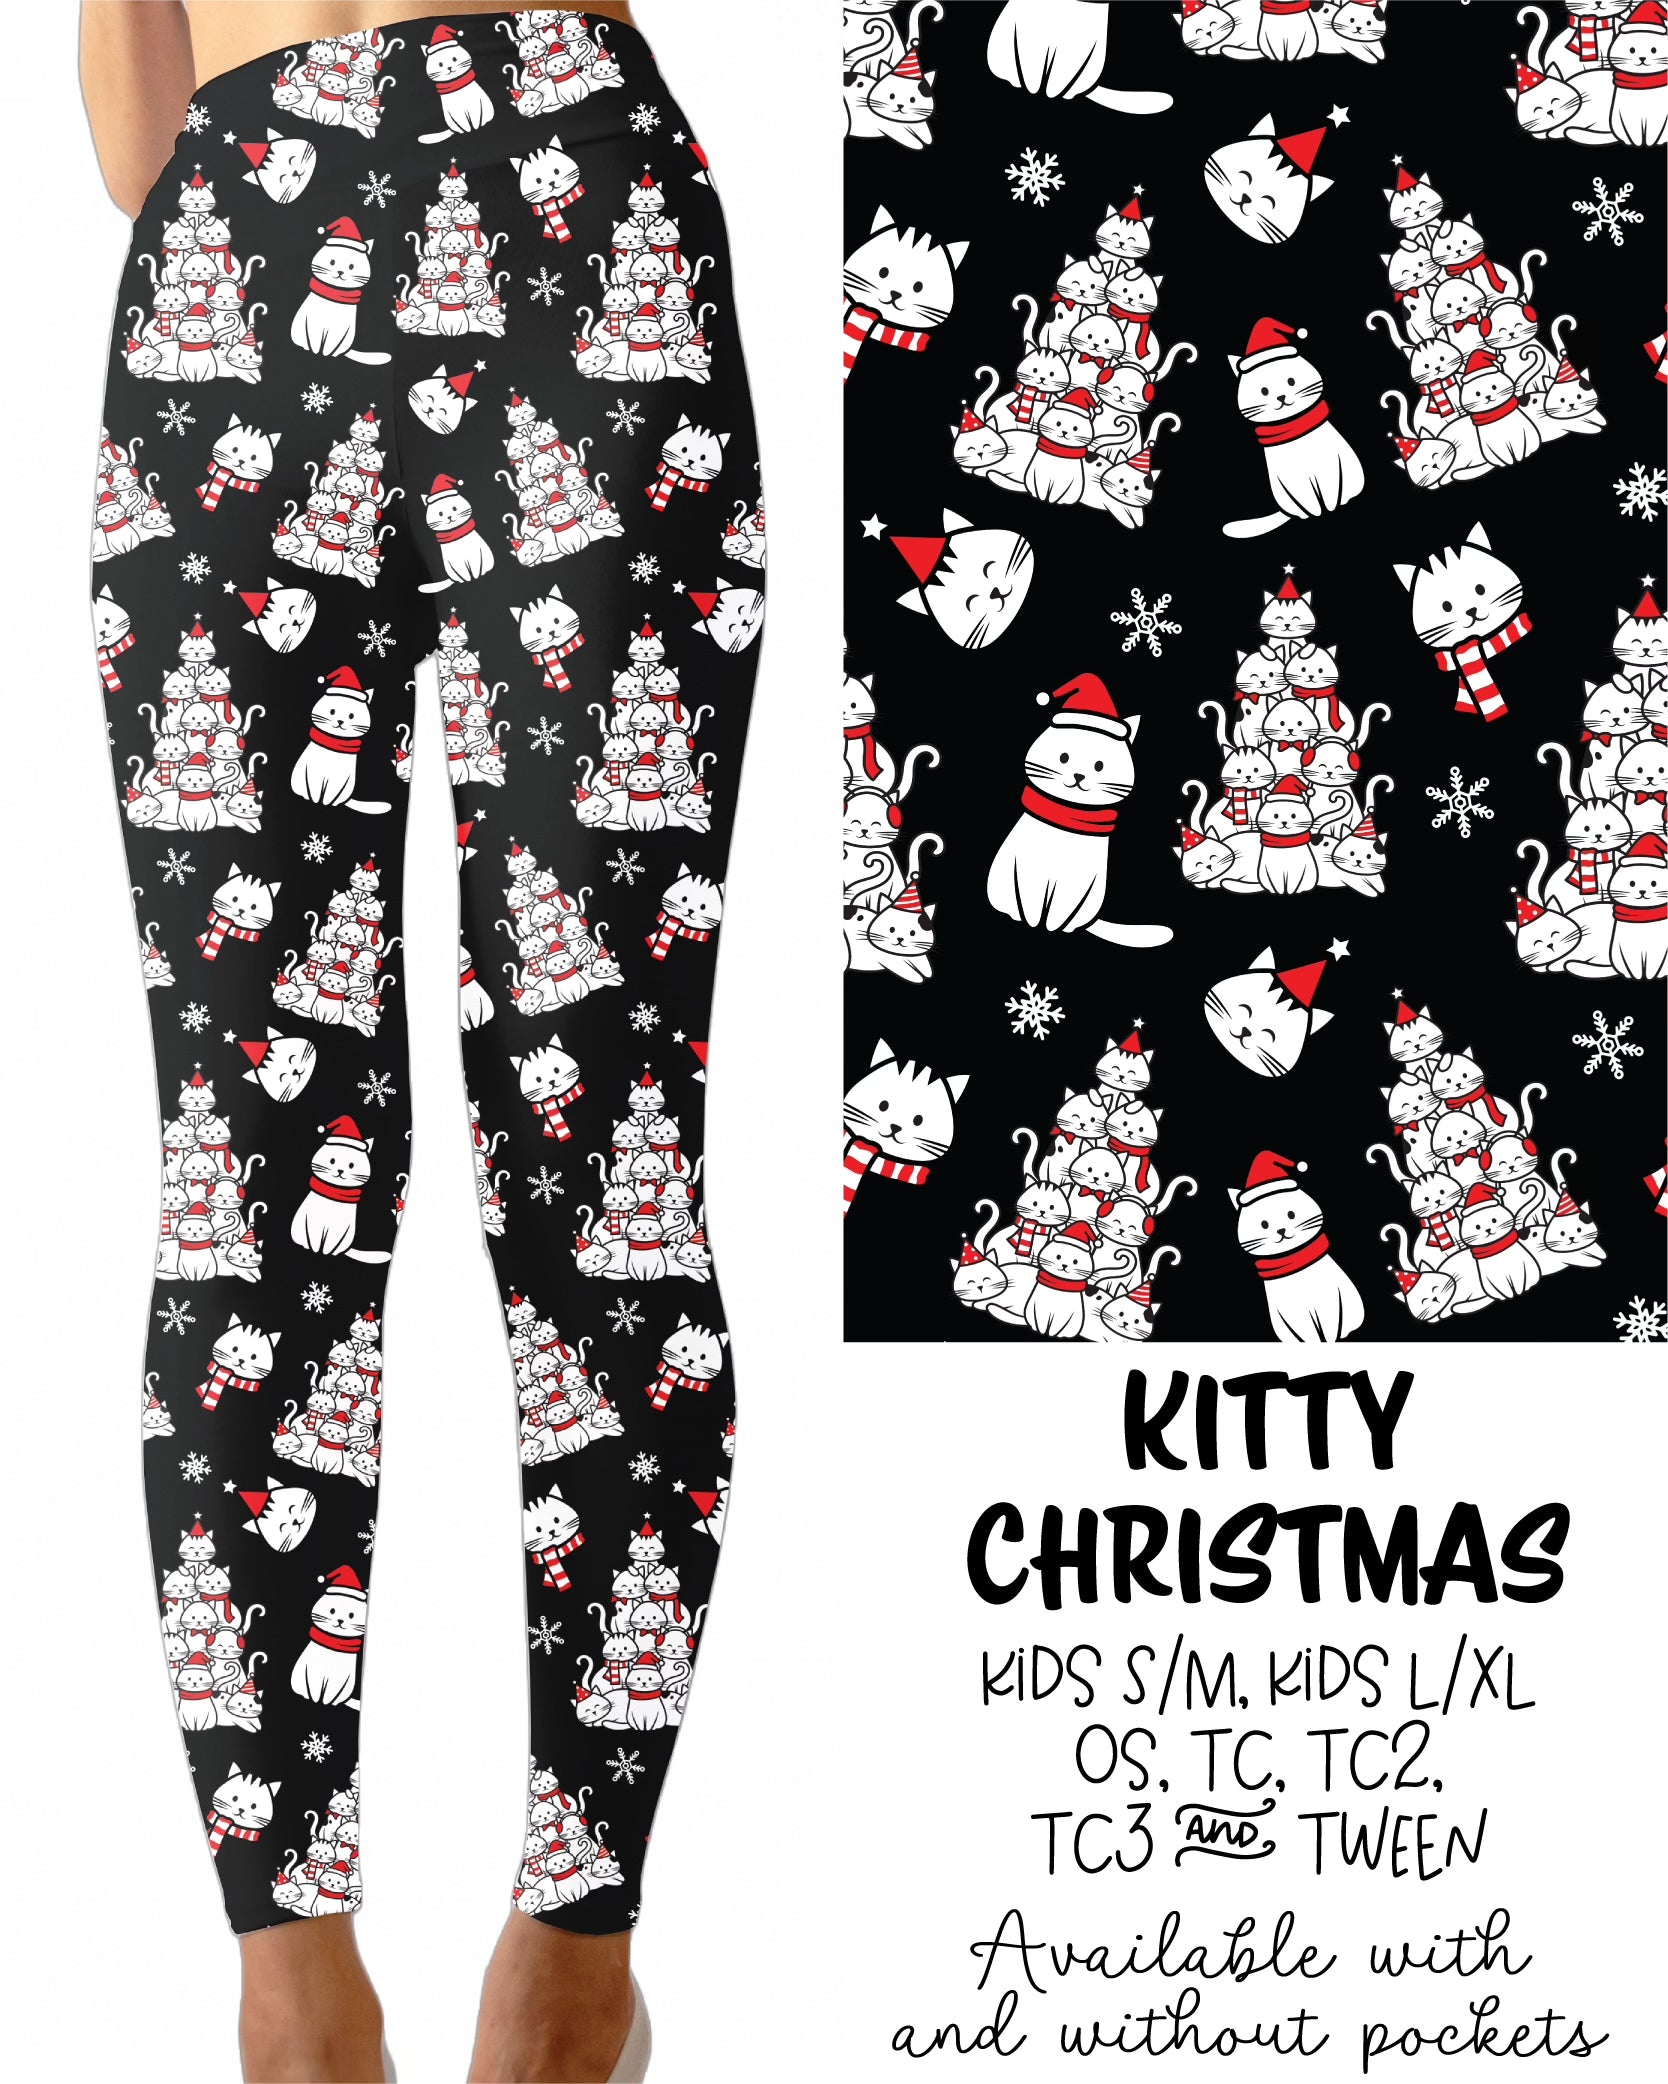 Kitty Christmas Leggings Full Length With and Without Pockets